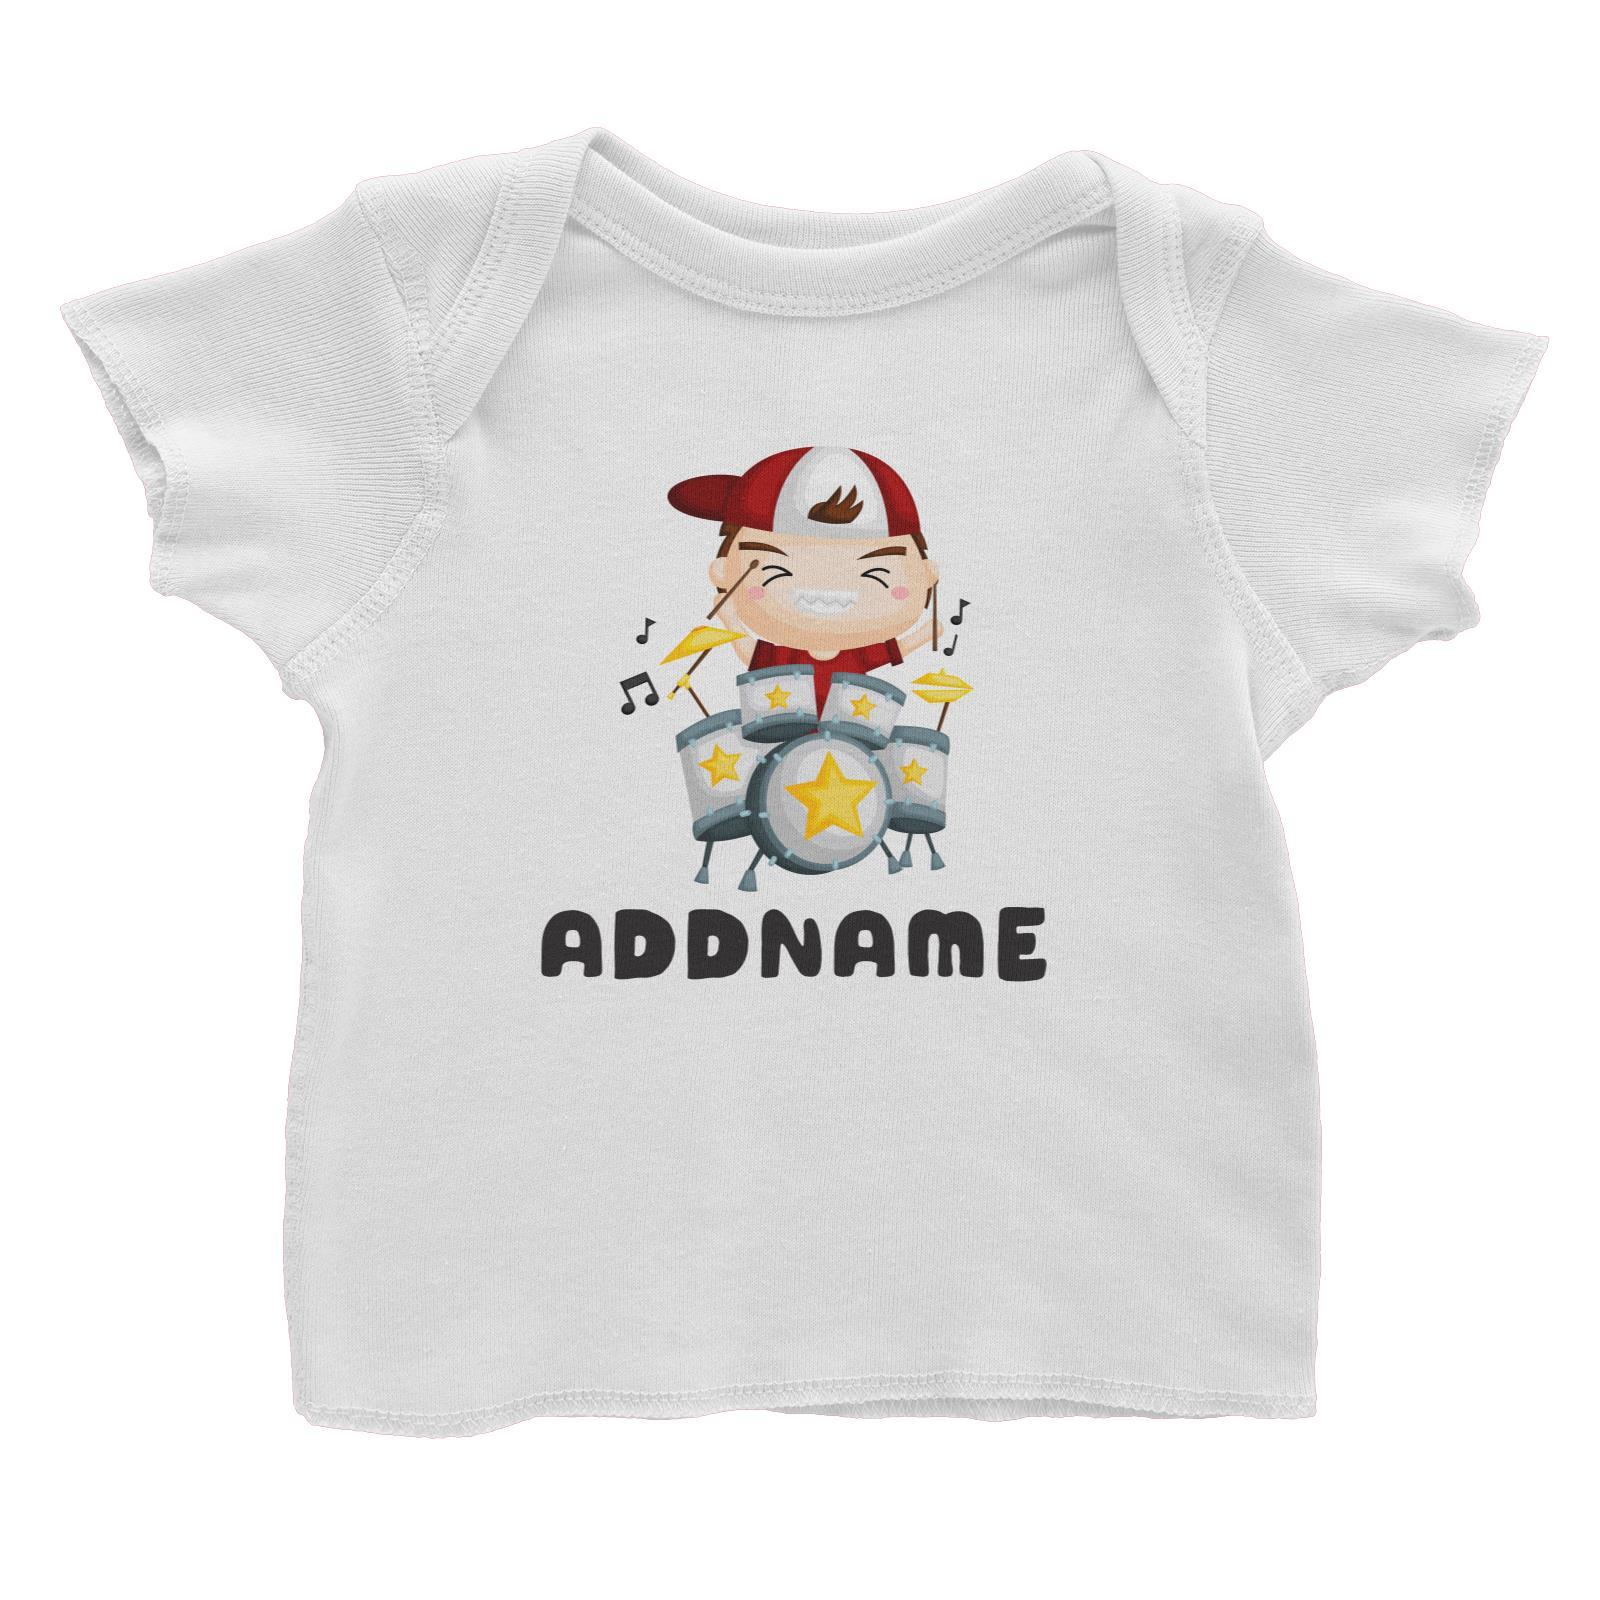 Birthday Music Band Boy Playing Drums Addname Baby T-Shirt